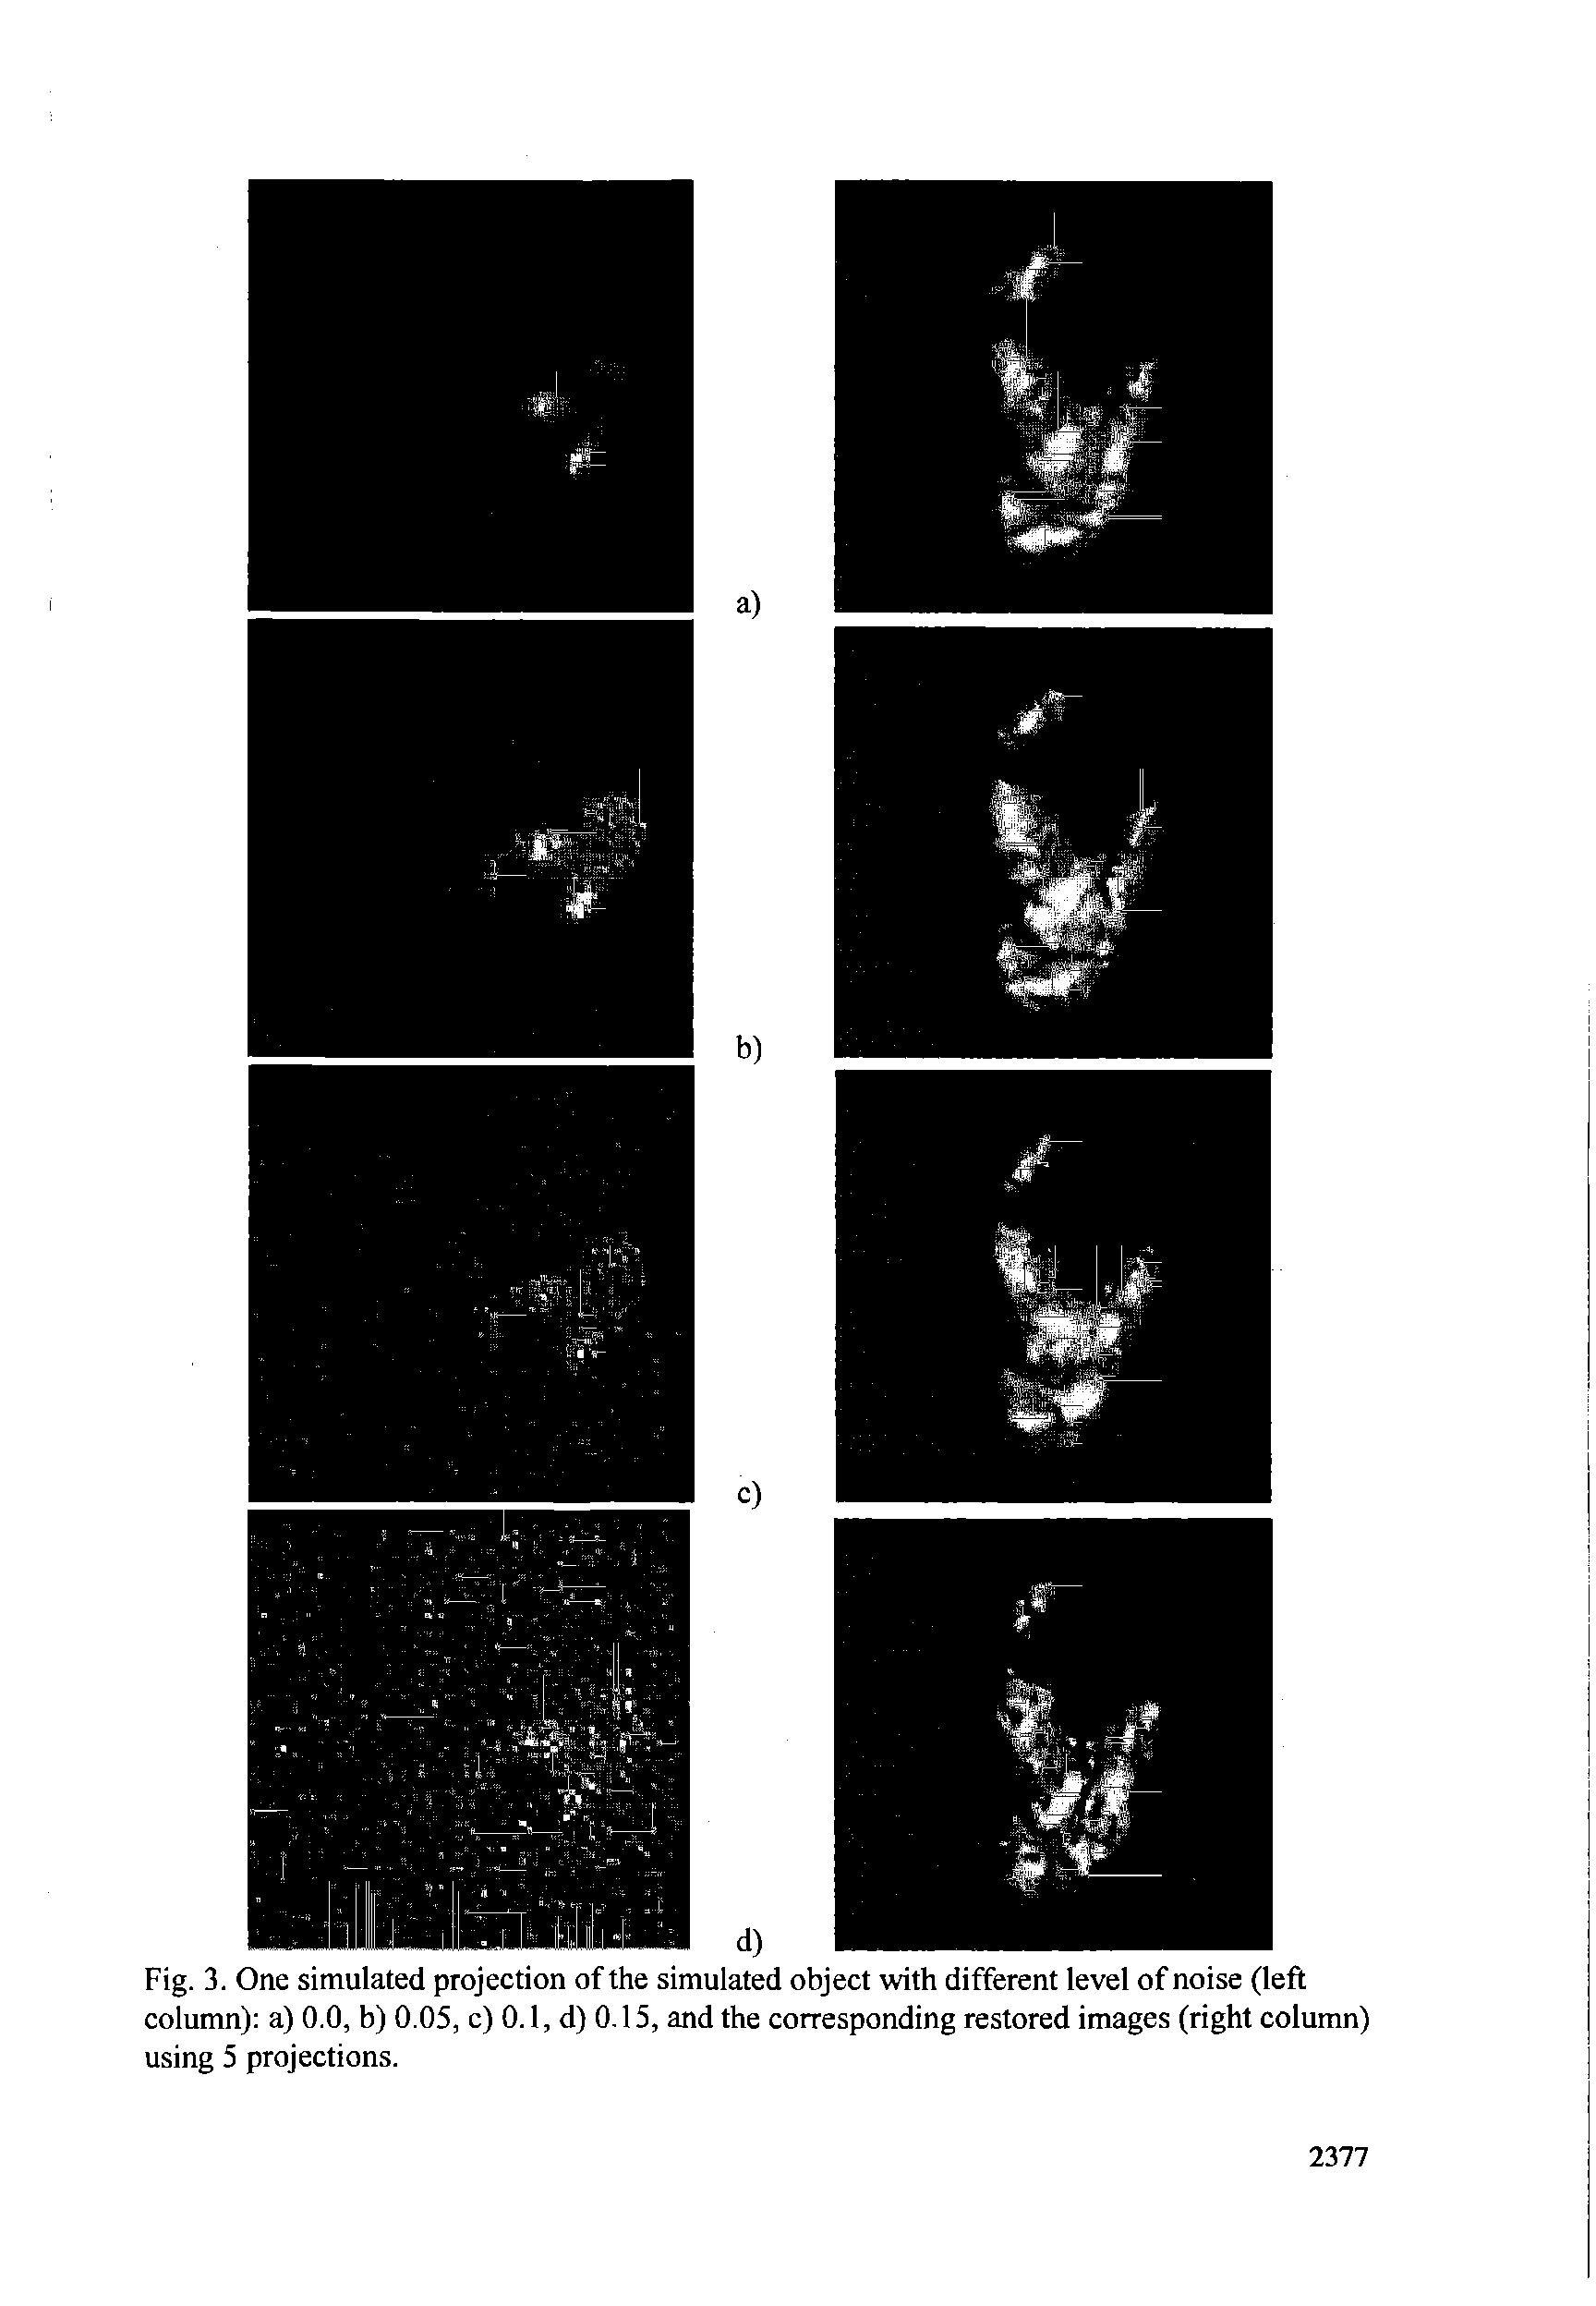 Fig. 3. One simulated projection of the simulated object with different level of noise (left column) a) 0.0, b) 0.05, c) 0.1, d) 0.15, and the corresponding restored images (right column) using 5 projections.